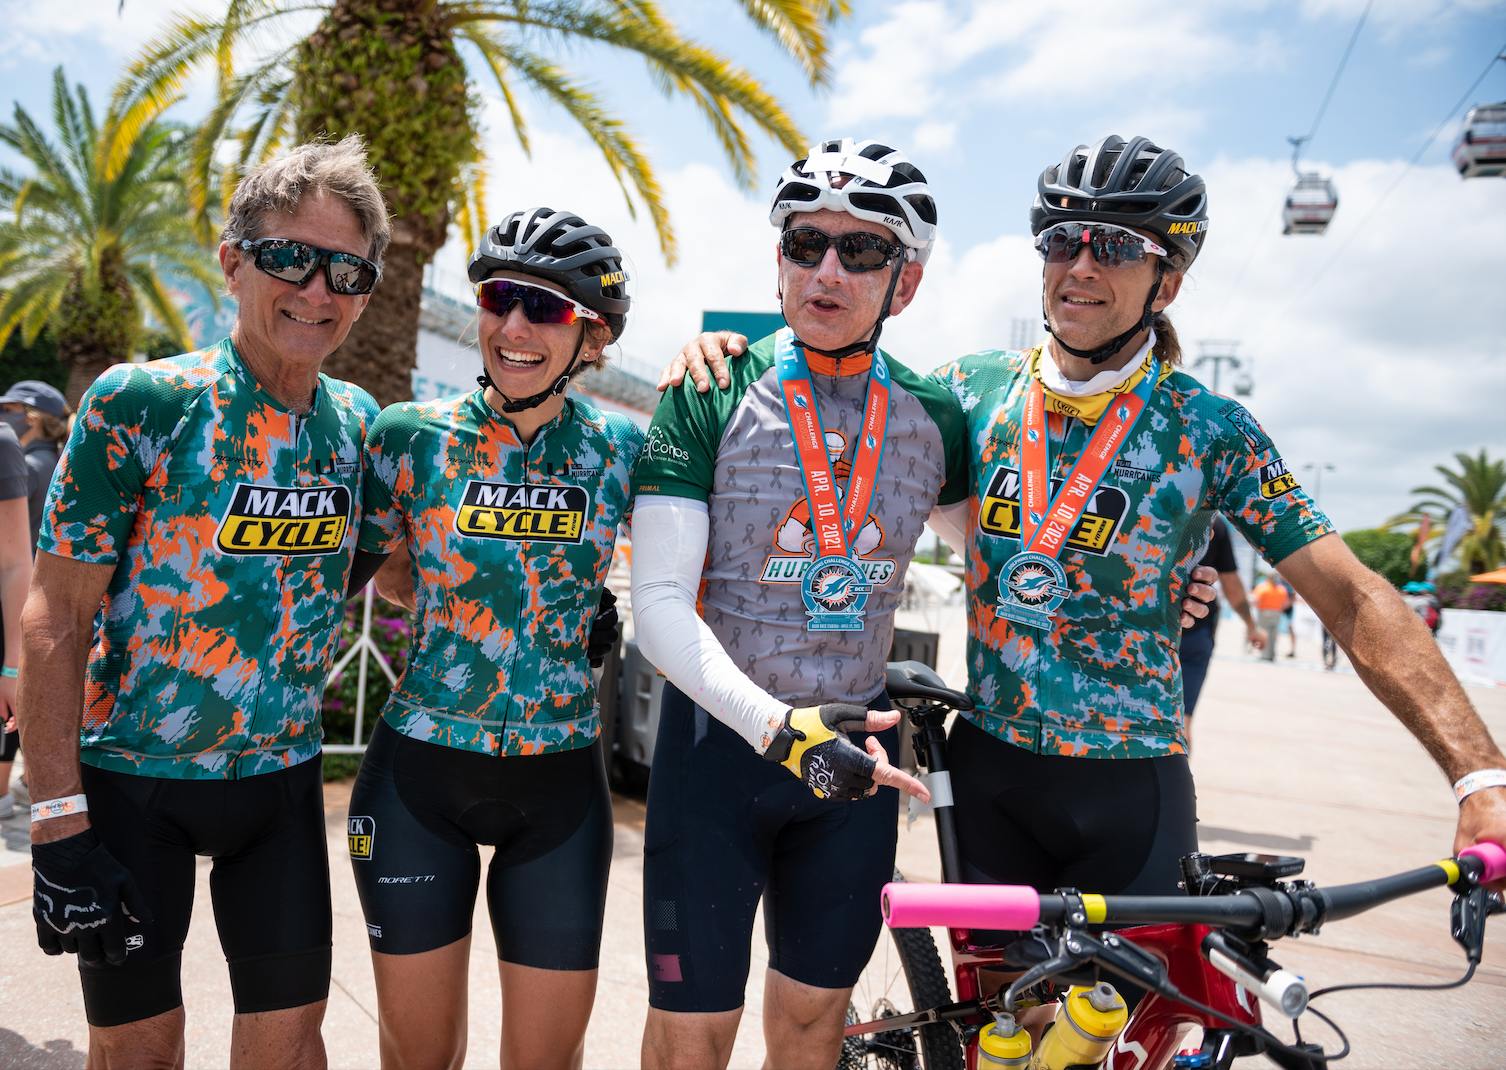 the Mack Cycle Family alongside Dr. Stephen Nimer at the finish line of DCC XI